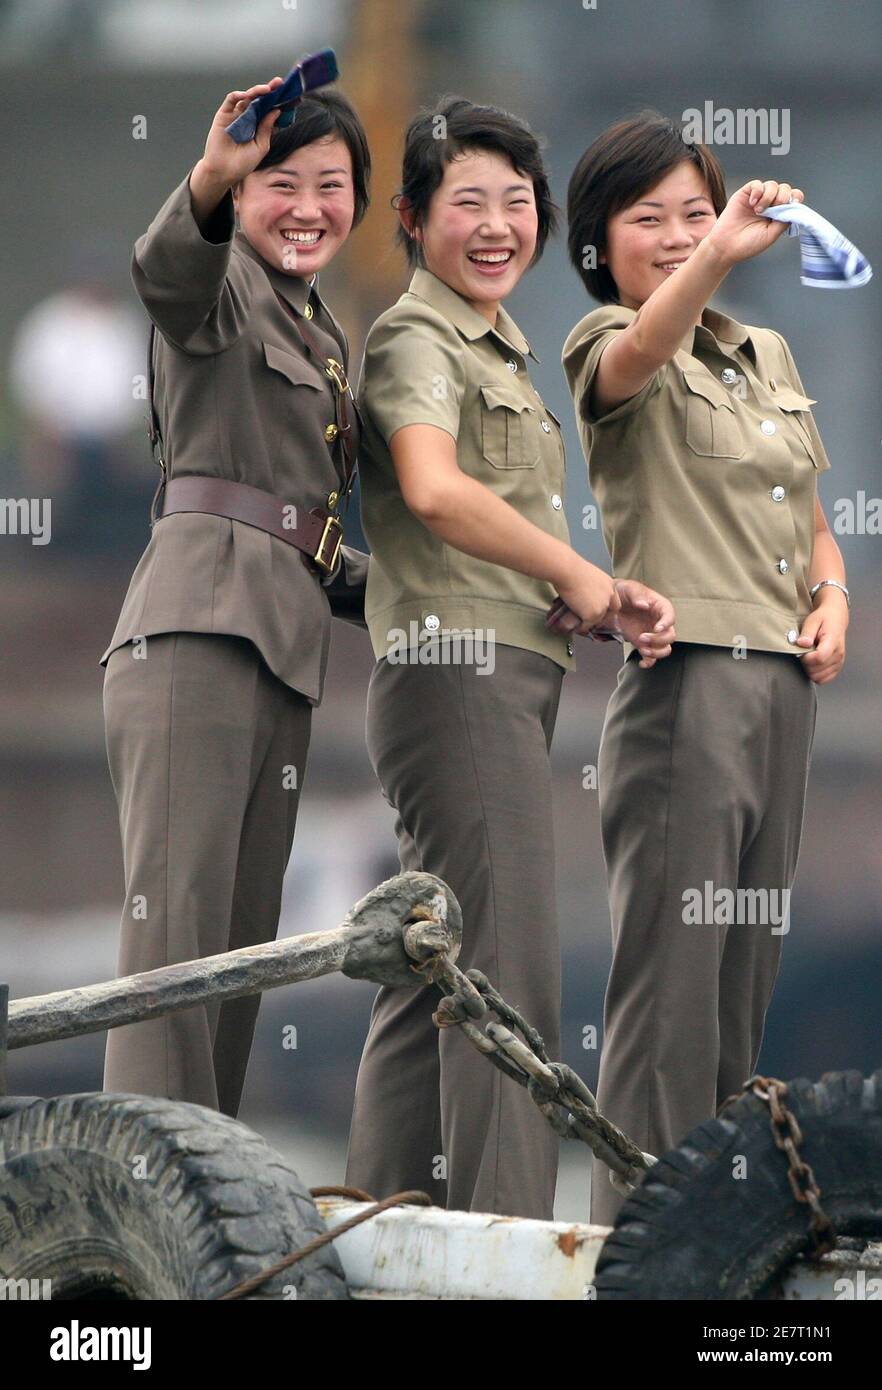 Female North Korean soldiers wave to a Chinese boat for tourists on the banks of Yalu River near the North Korean town of Sinuiju July 27, 2010. REUTERS/Jacky Chen (NORTH KOREA - Tags: MILITARY SOCIETY IMAGES OF THE DAY) Stock Photo